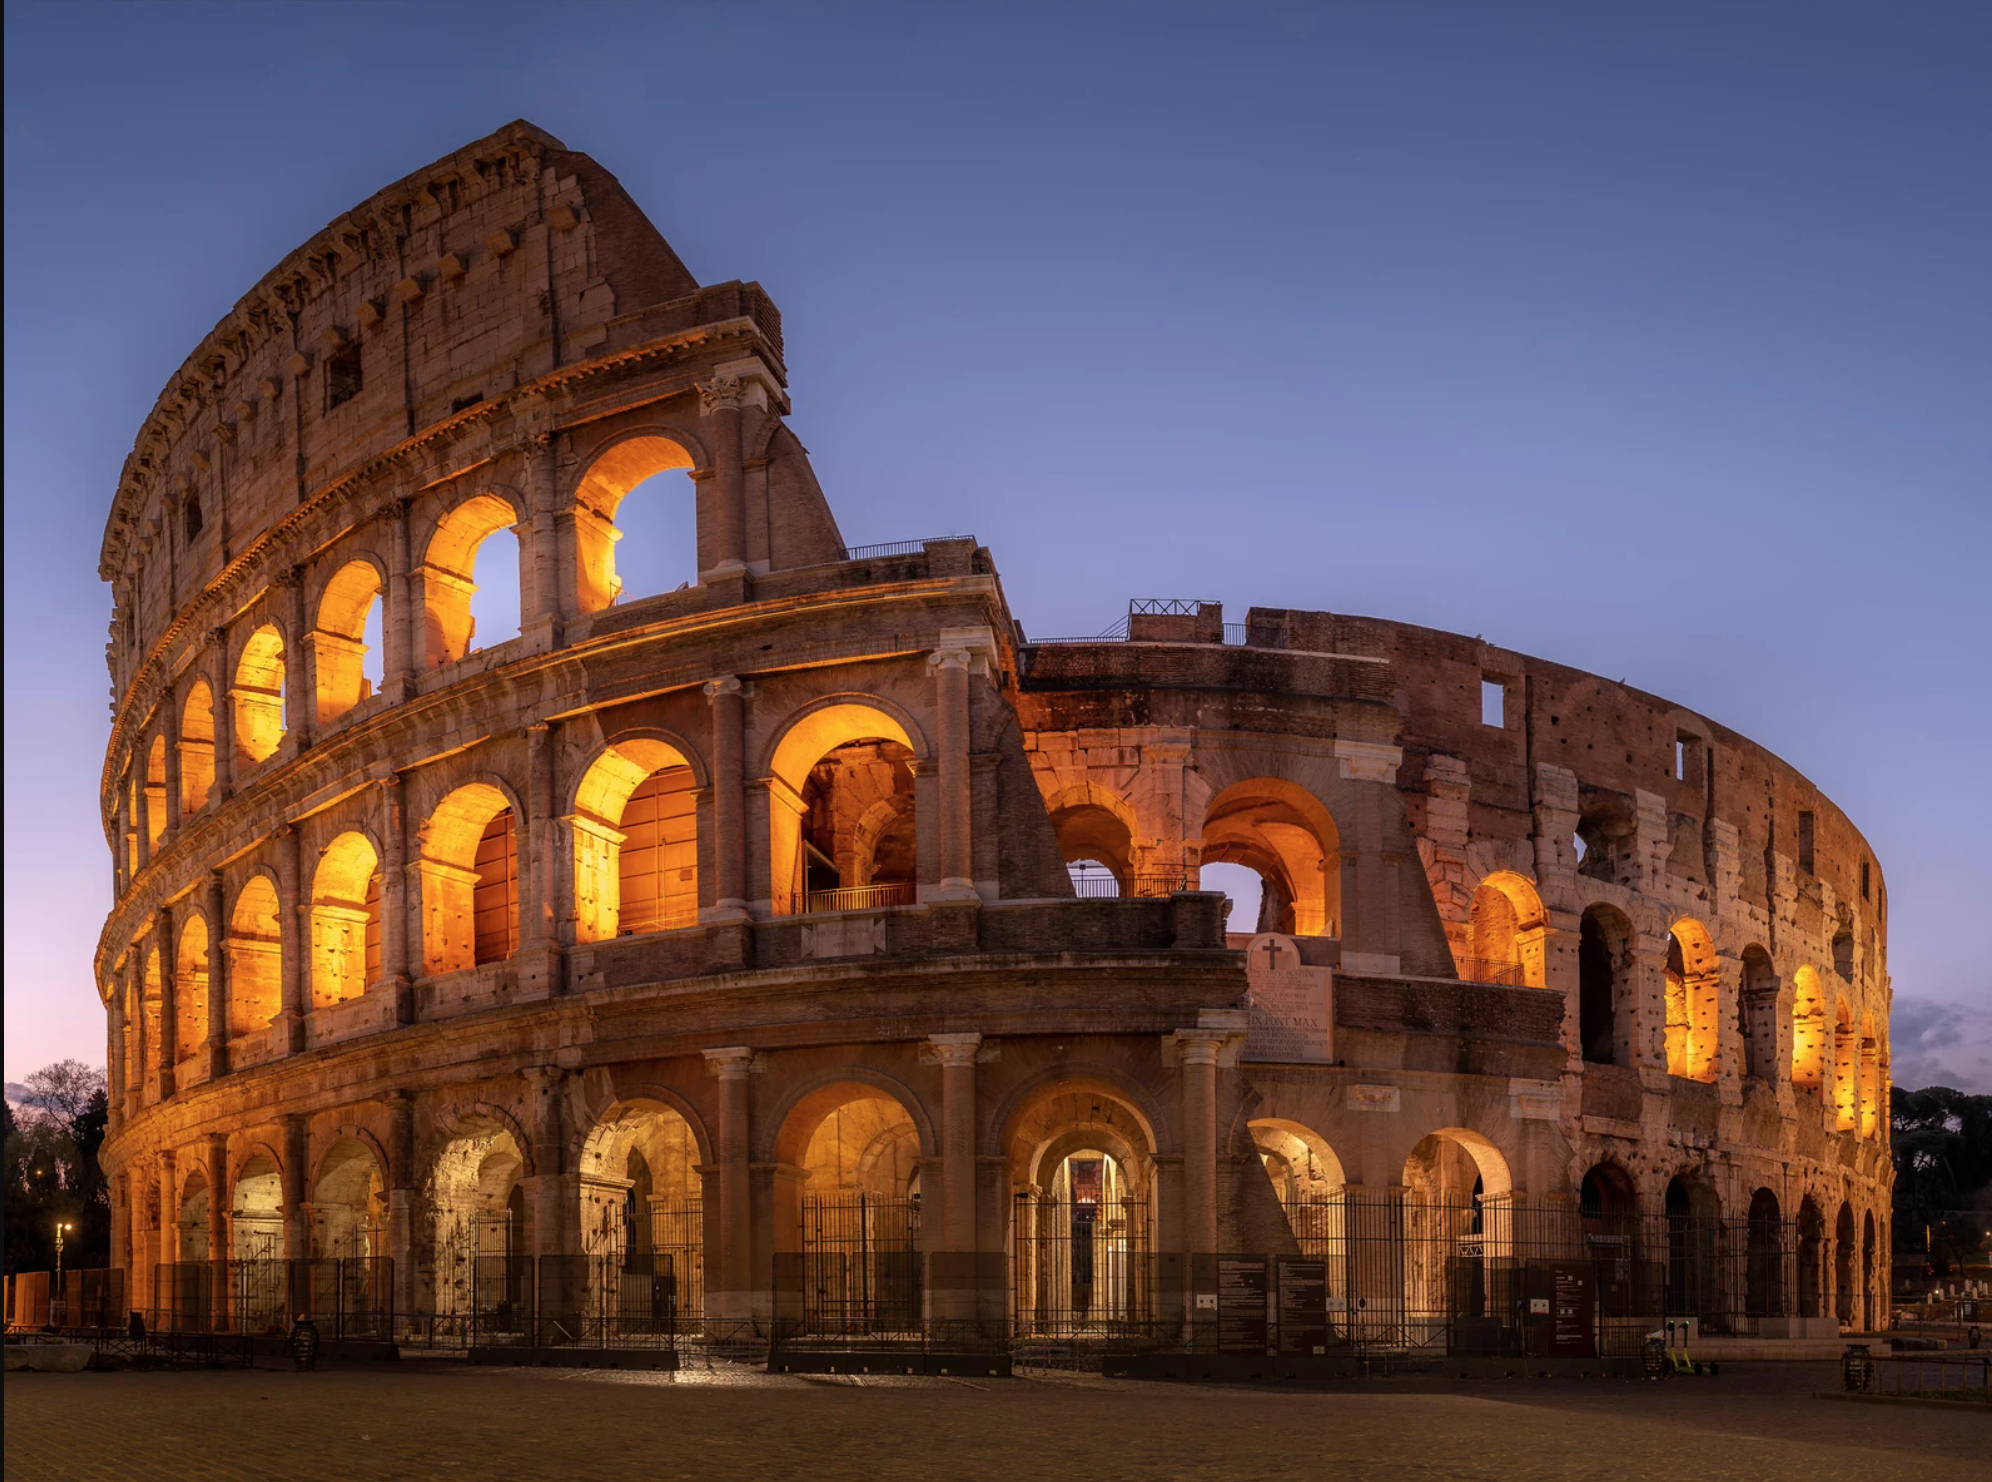 Course Exploratory photography: “Rome. A vision”